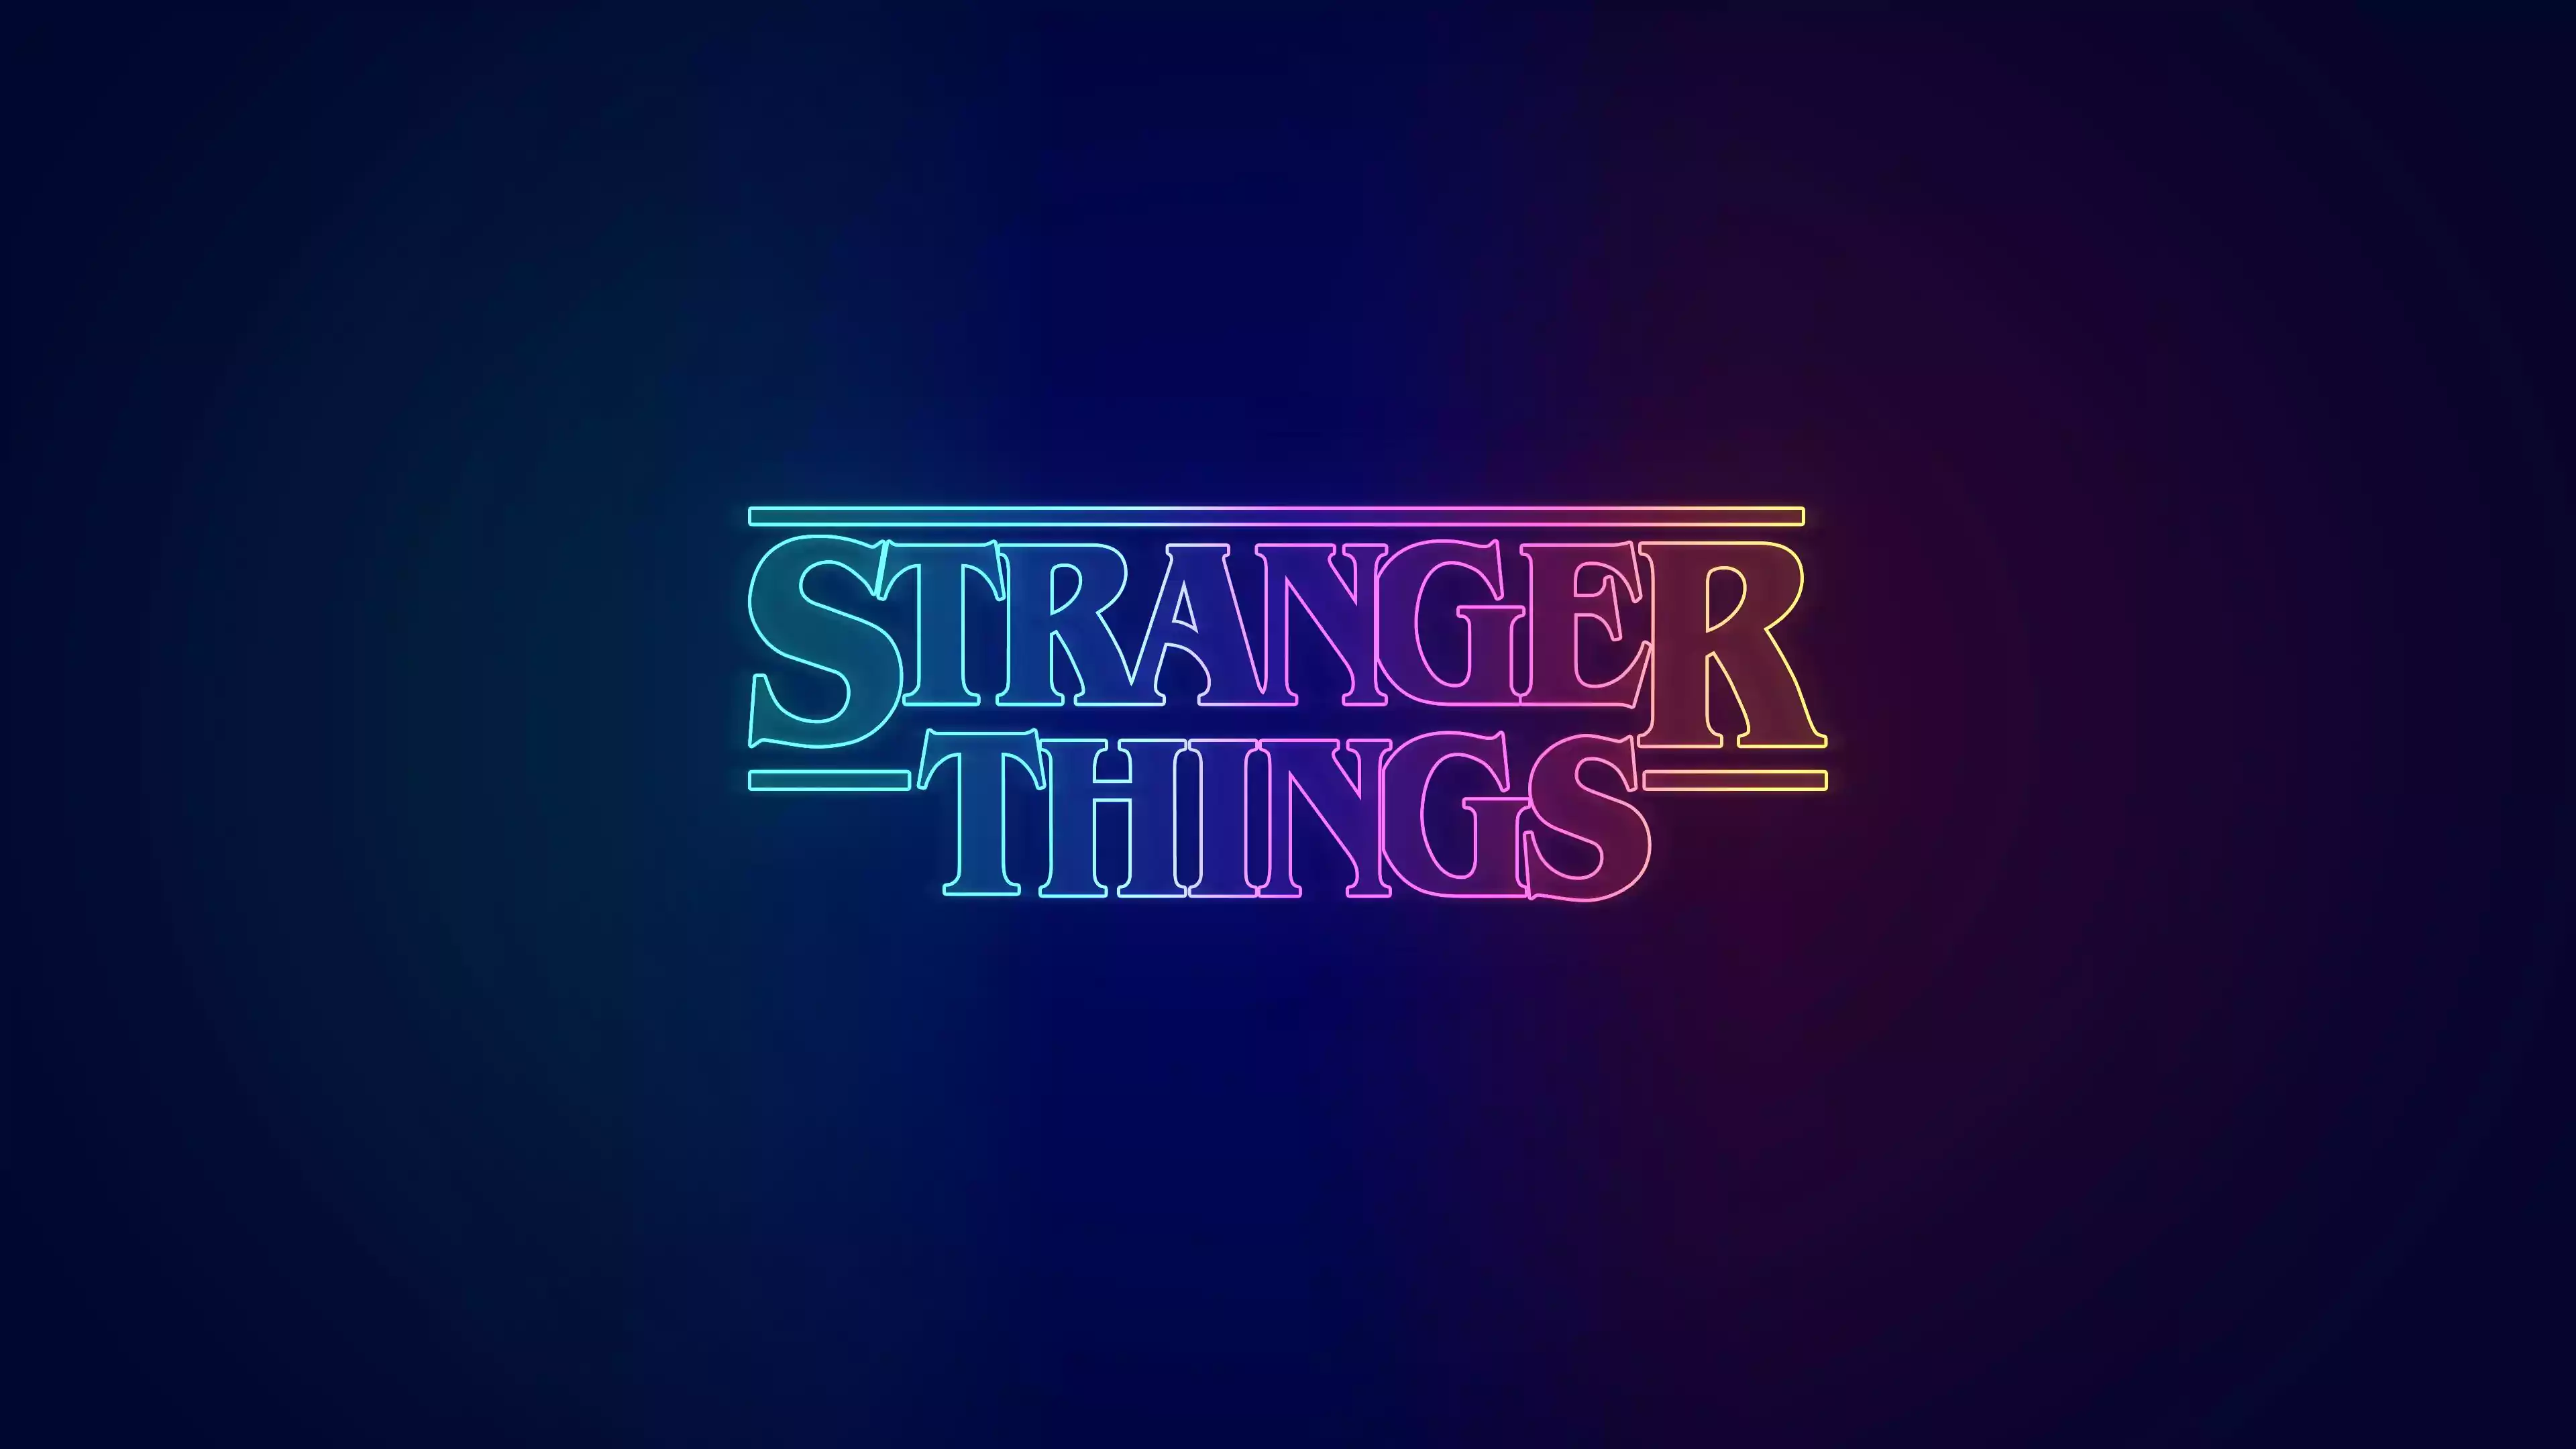 Download 80+ 4K Stranger Things Wallpaper for Your iPhone | TechRushi